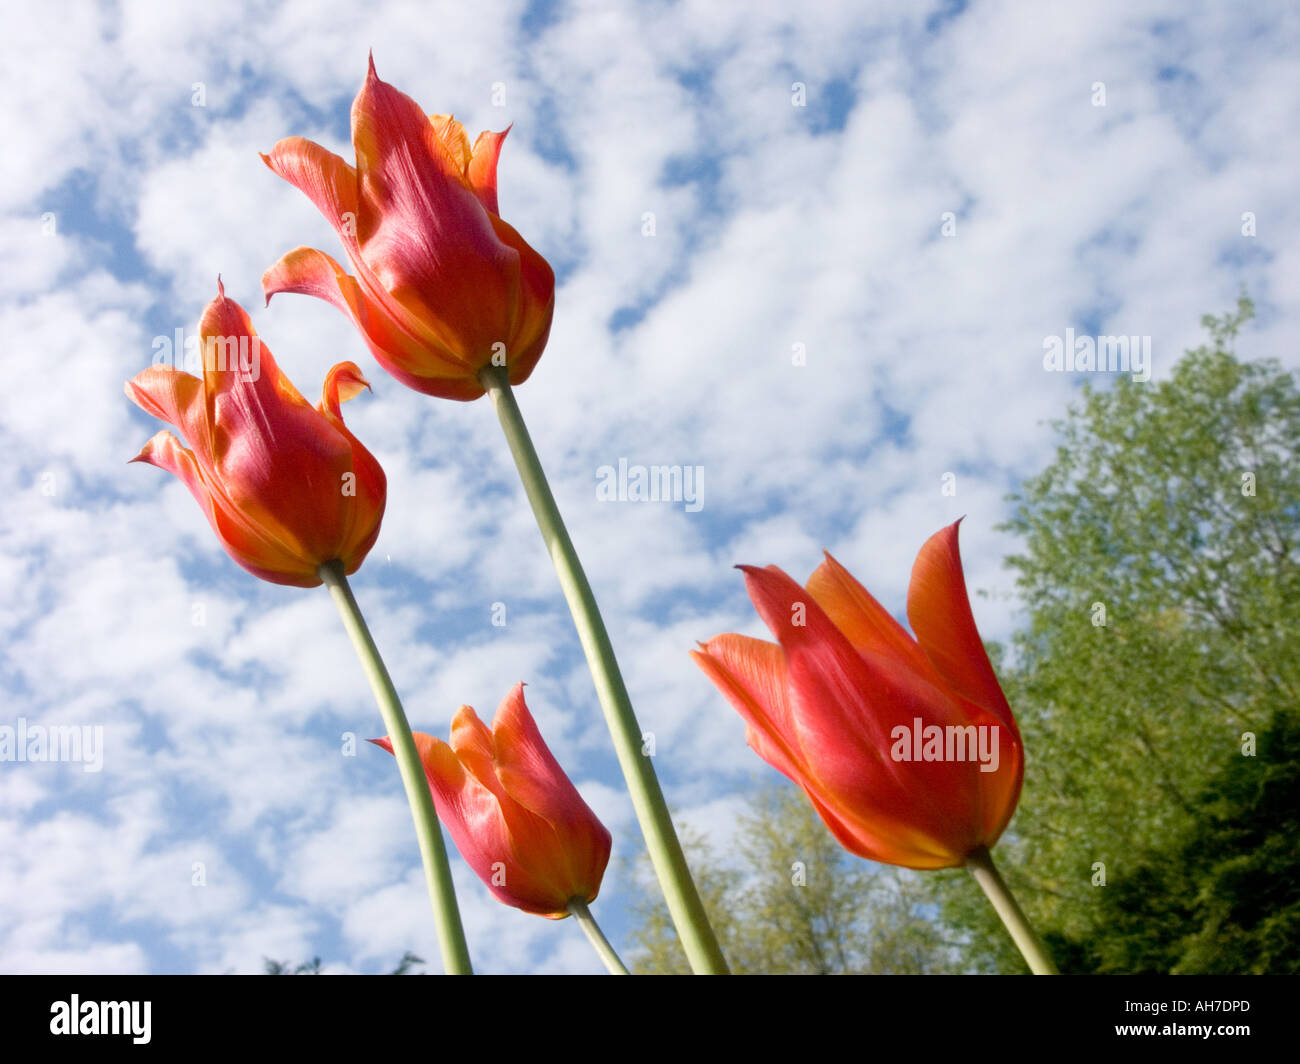 Tall orange red tulips (Tulipa Marjolein) pictured from below against a mackerel spring sky, England Stock Photo